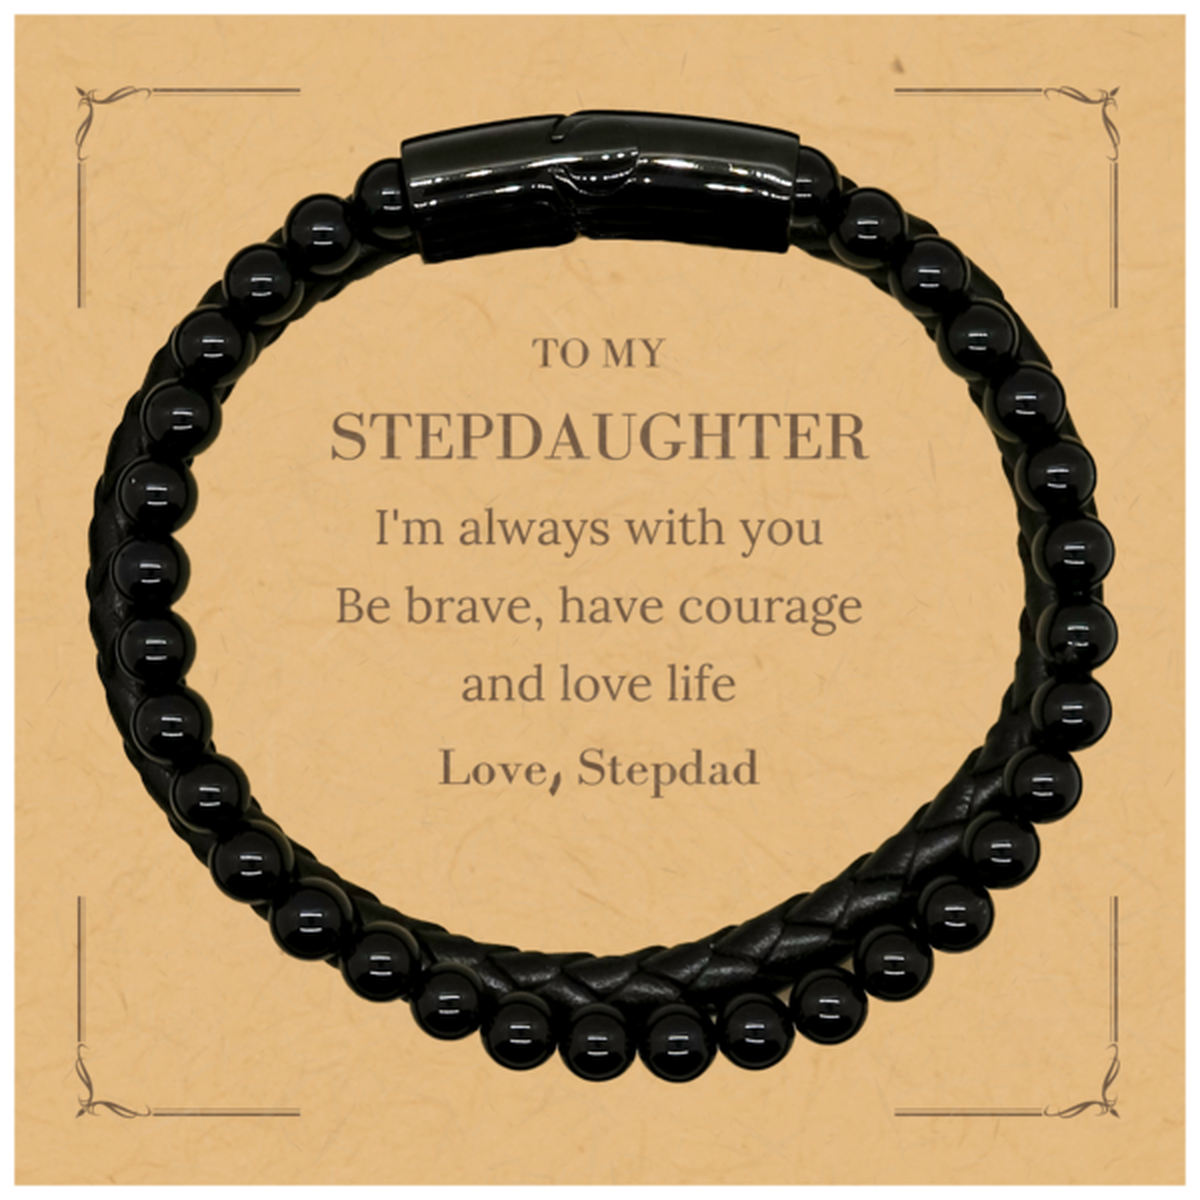 To My Stepdaughter Gifts from Stepdad, Unique Stone Leather Bracelets Inspirational Christmas Birthday Graduation Gifts for Stepdaughter I'm always with you. Be brave, have courage and love life. Love, Stepdad